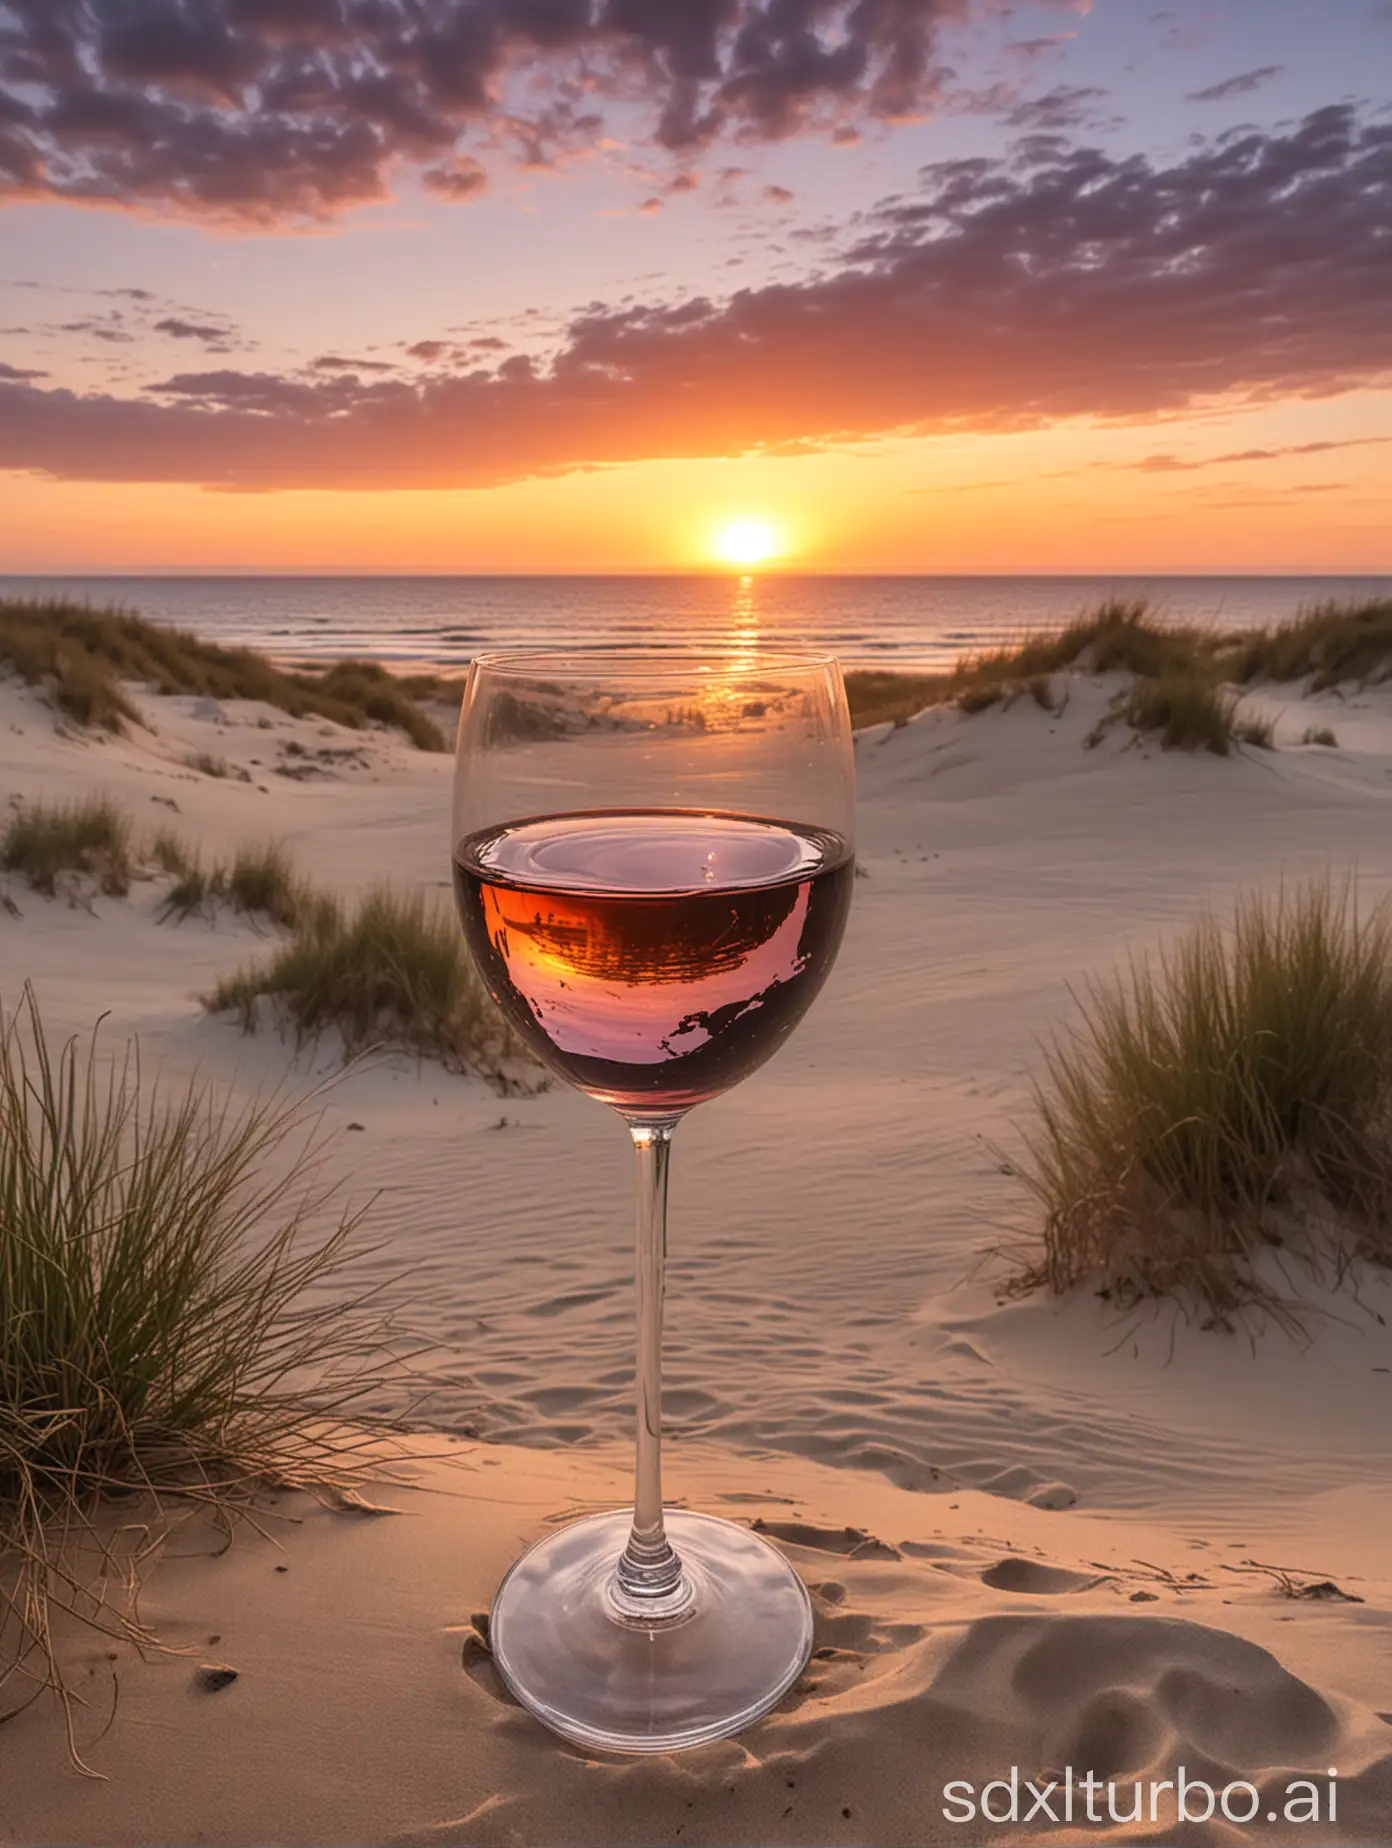 Seaside-Sunset-with-Wine-Glass